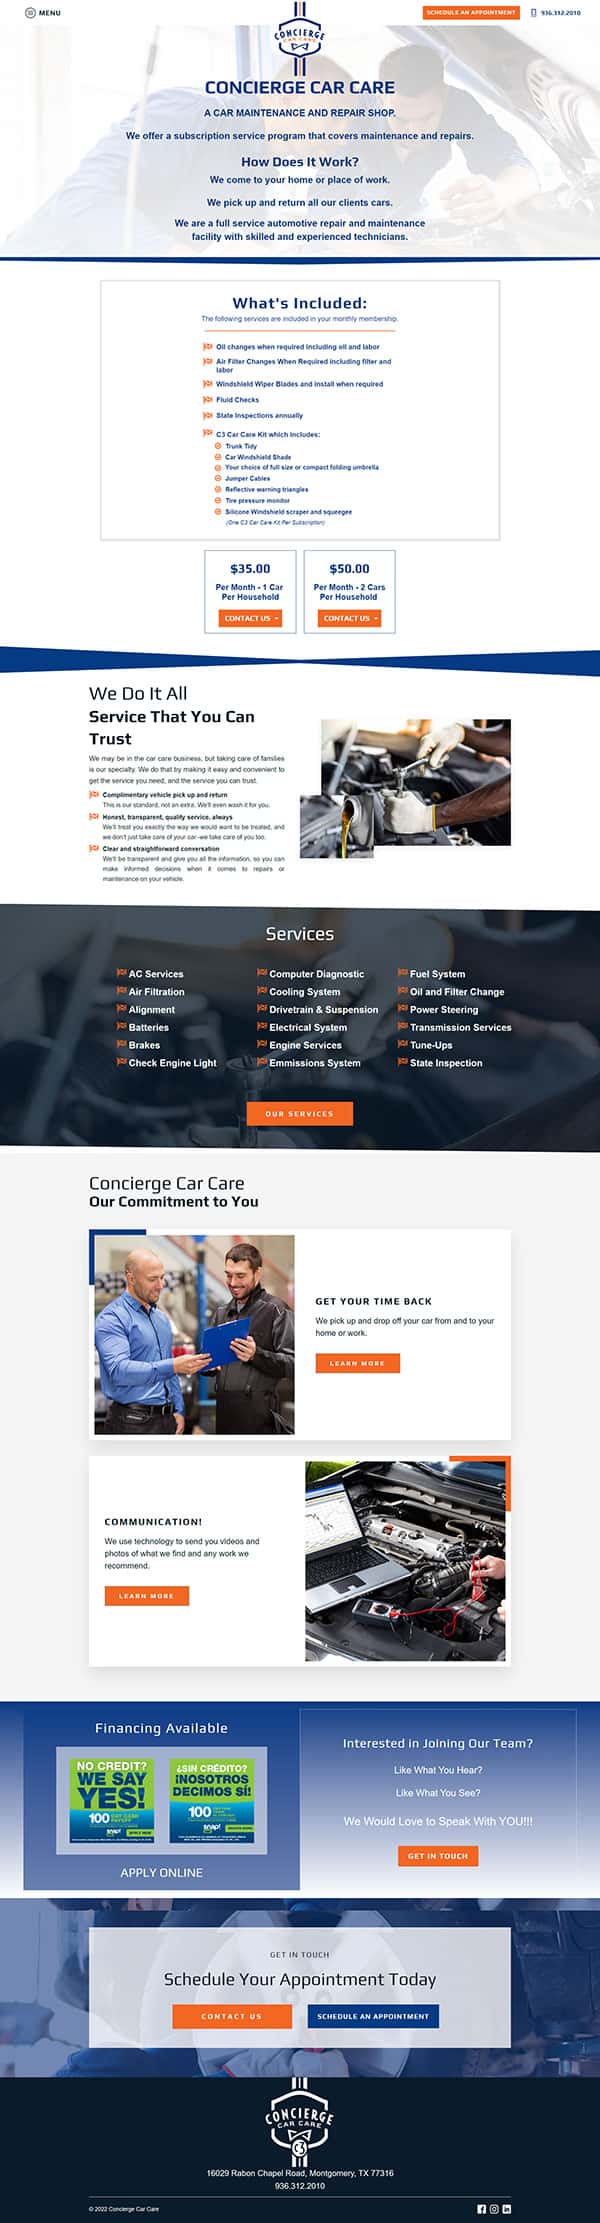 C3 Car Care Home Page